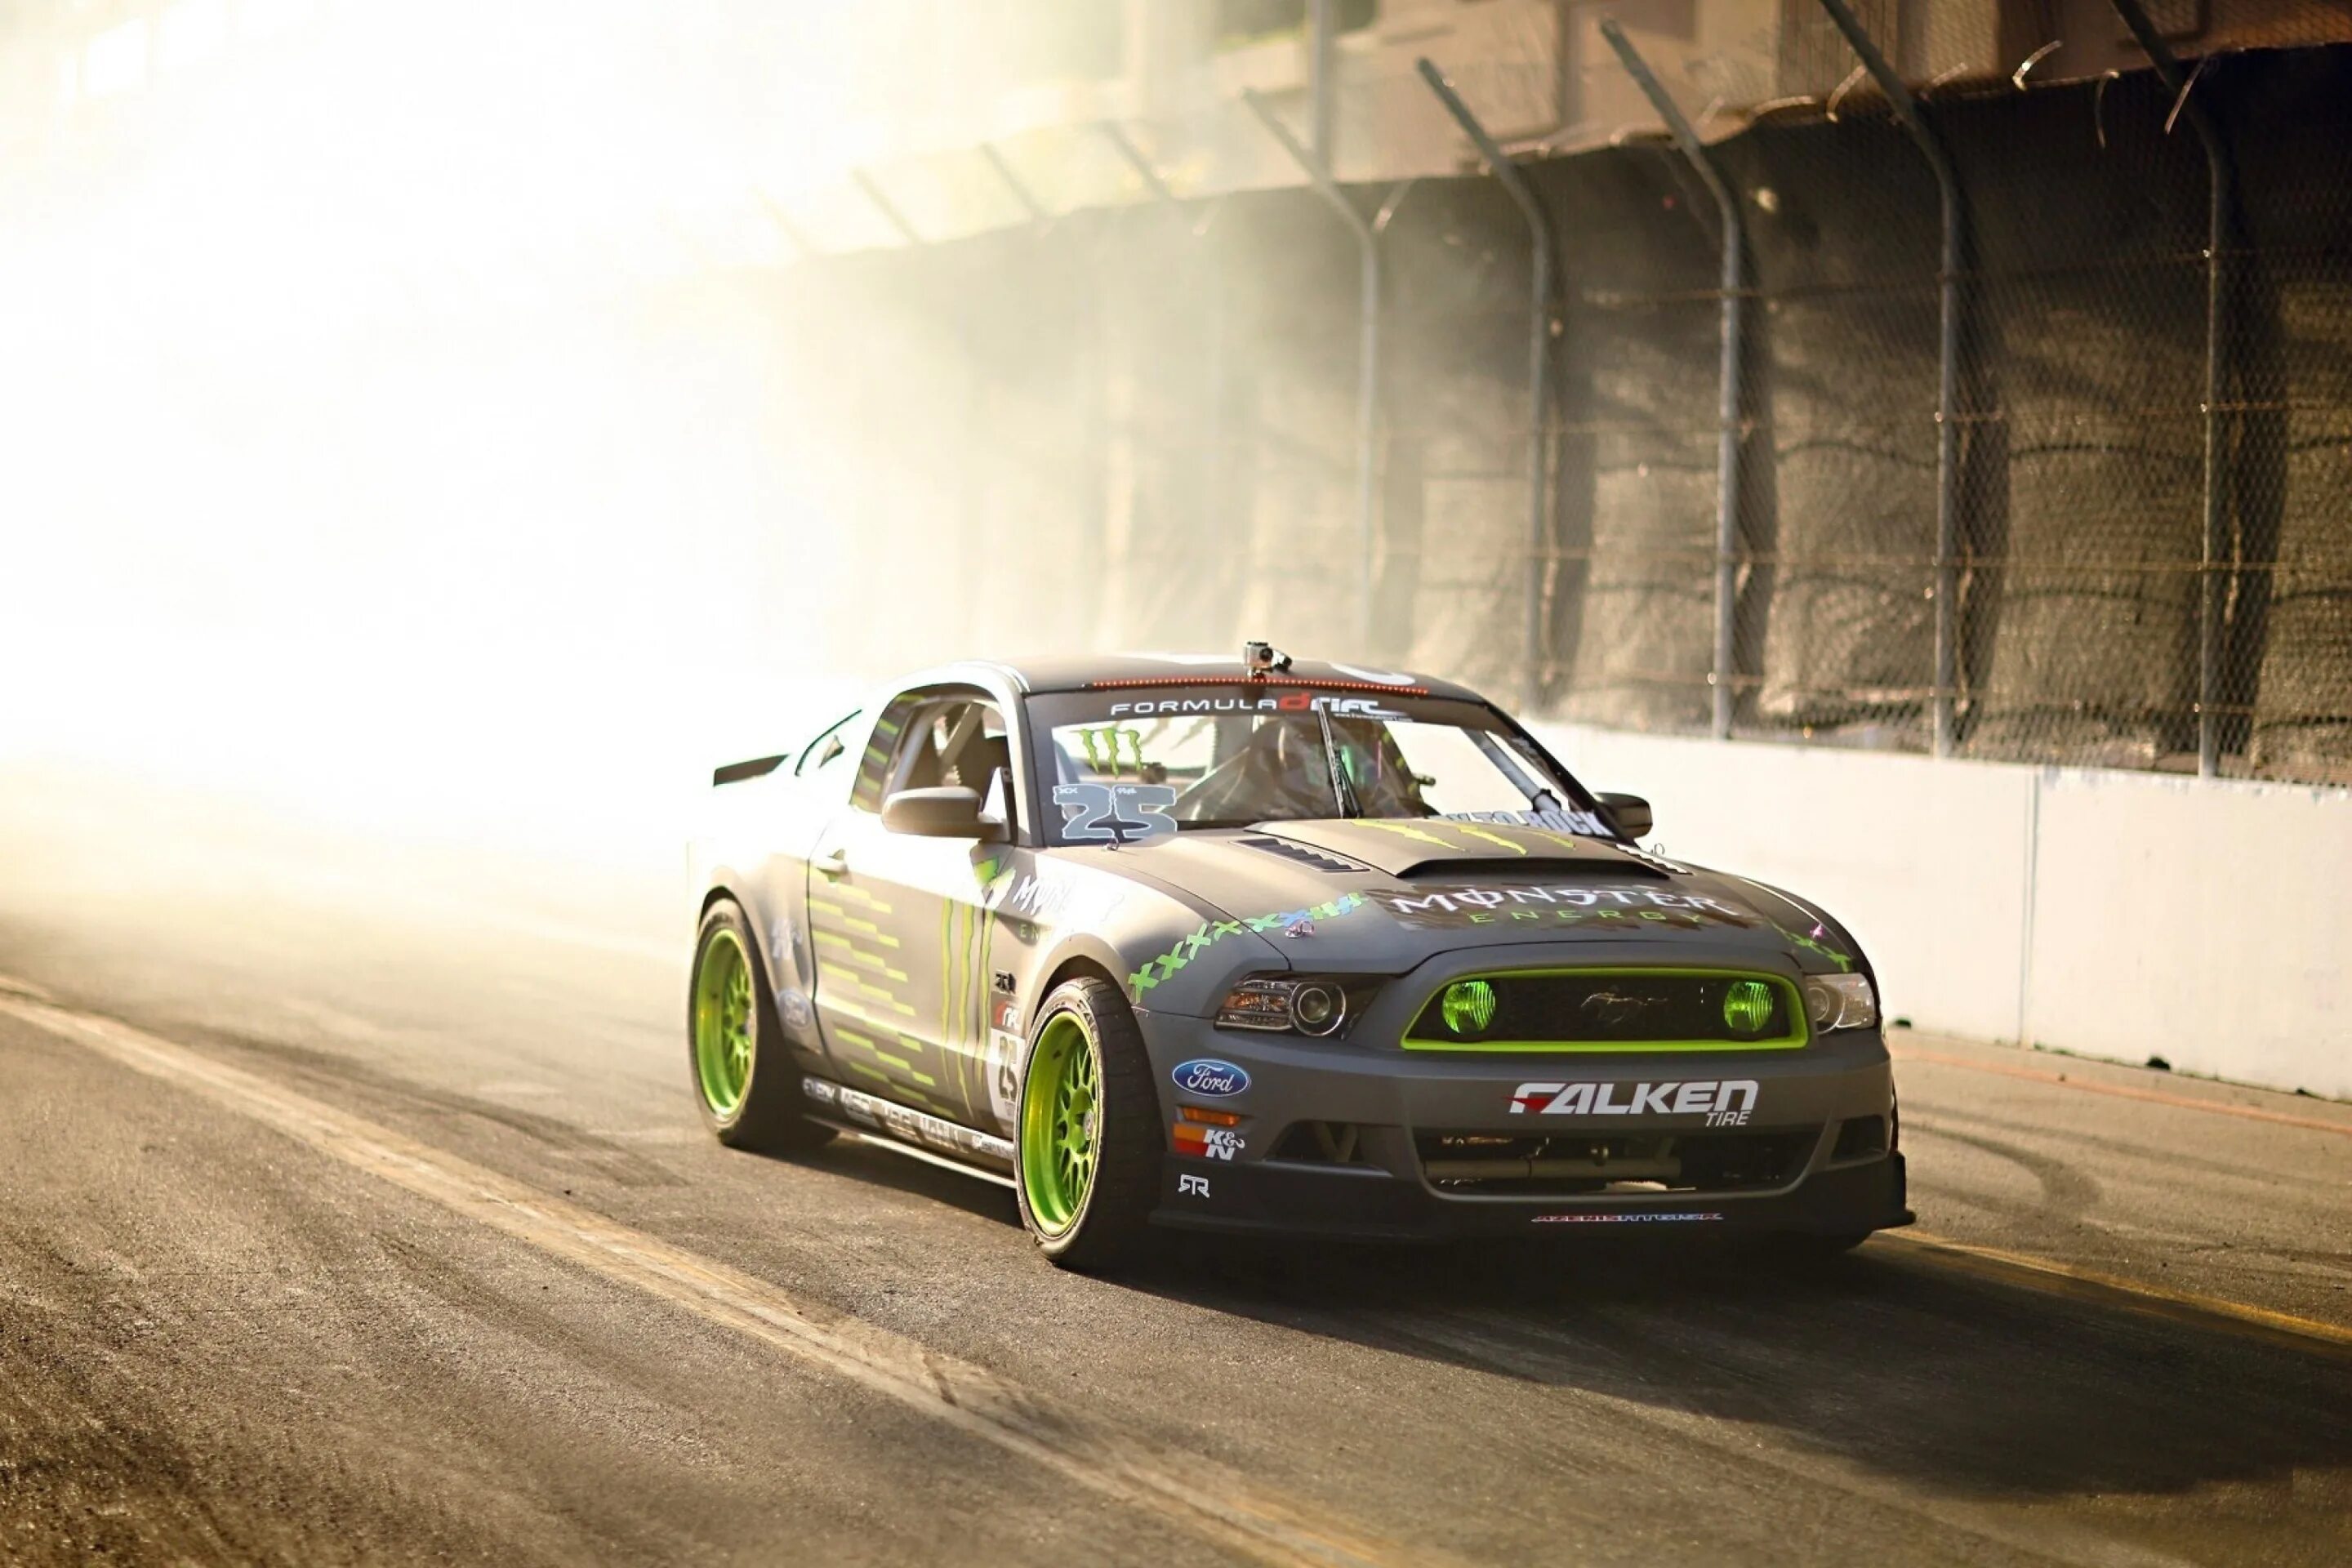 Drift sports. Ford Mustang gt3. Форд Мустанг ГТ 500 дрифт. Ford Mustang gt дрифт. Форд Мустанг ГТ 500 монстр Энержи.